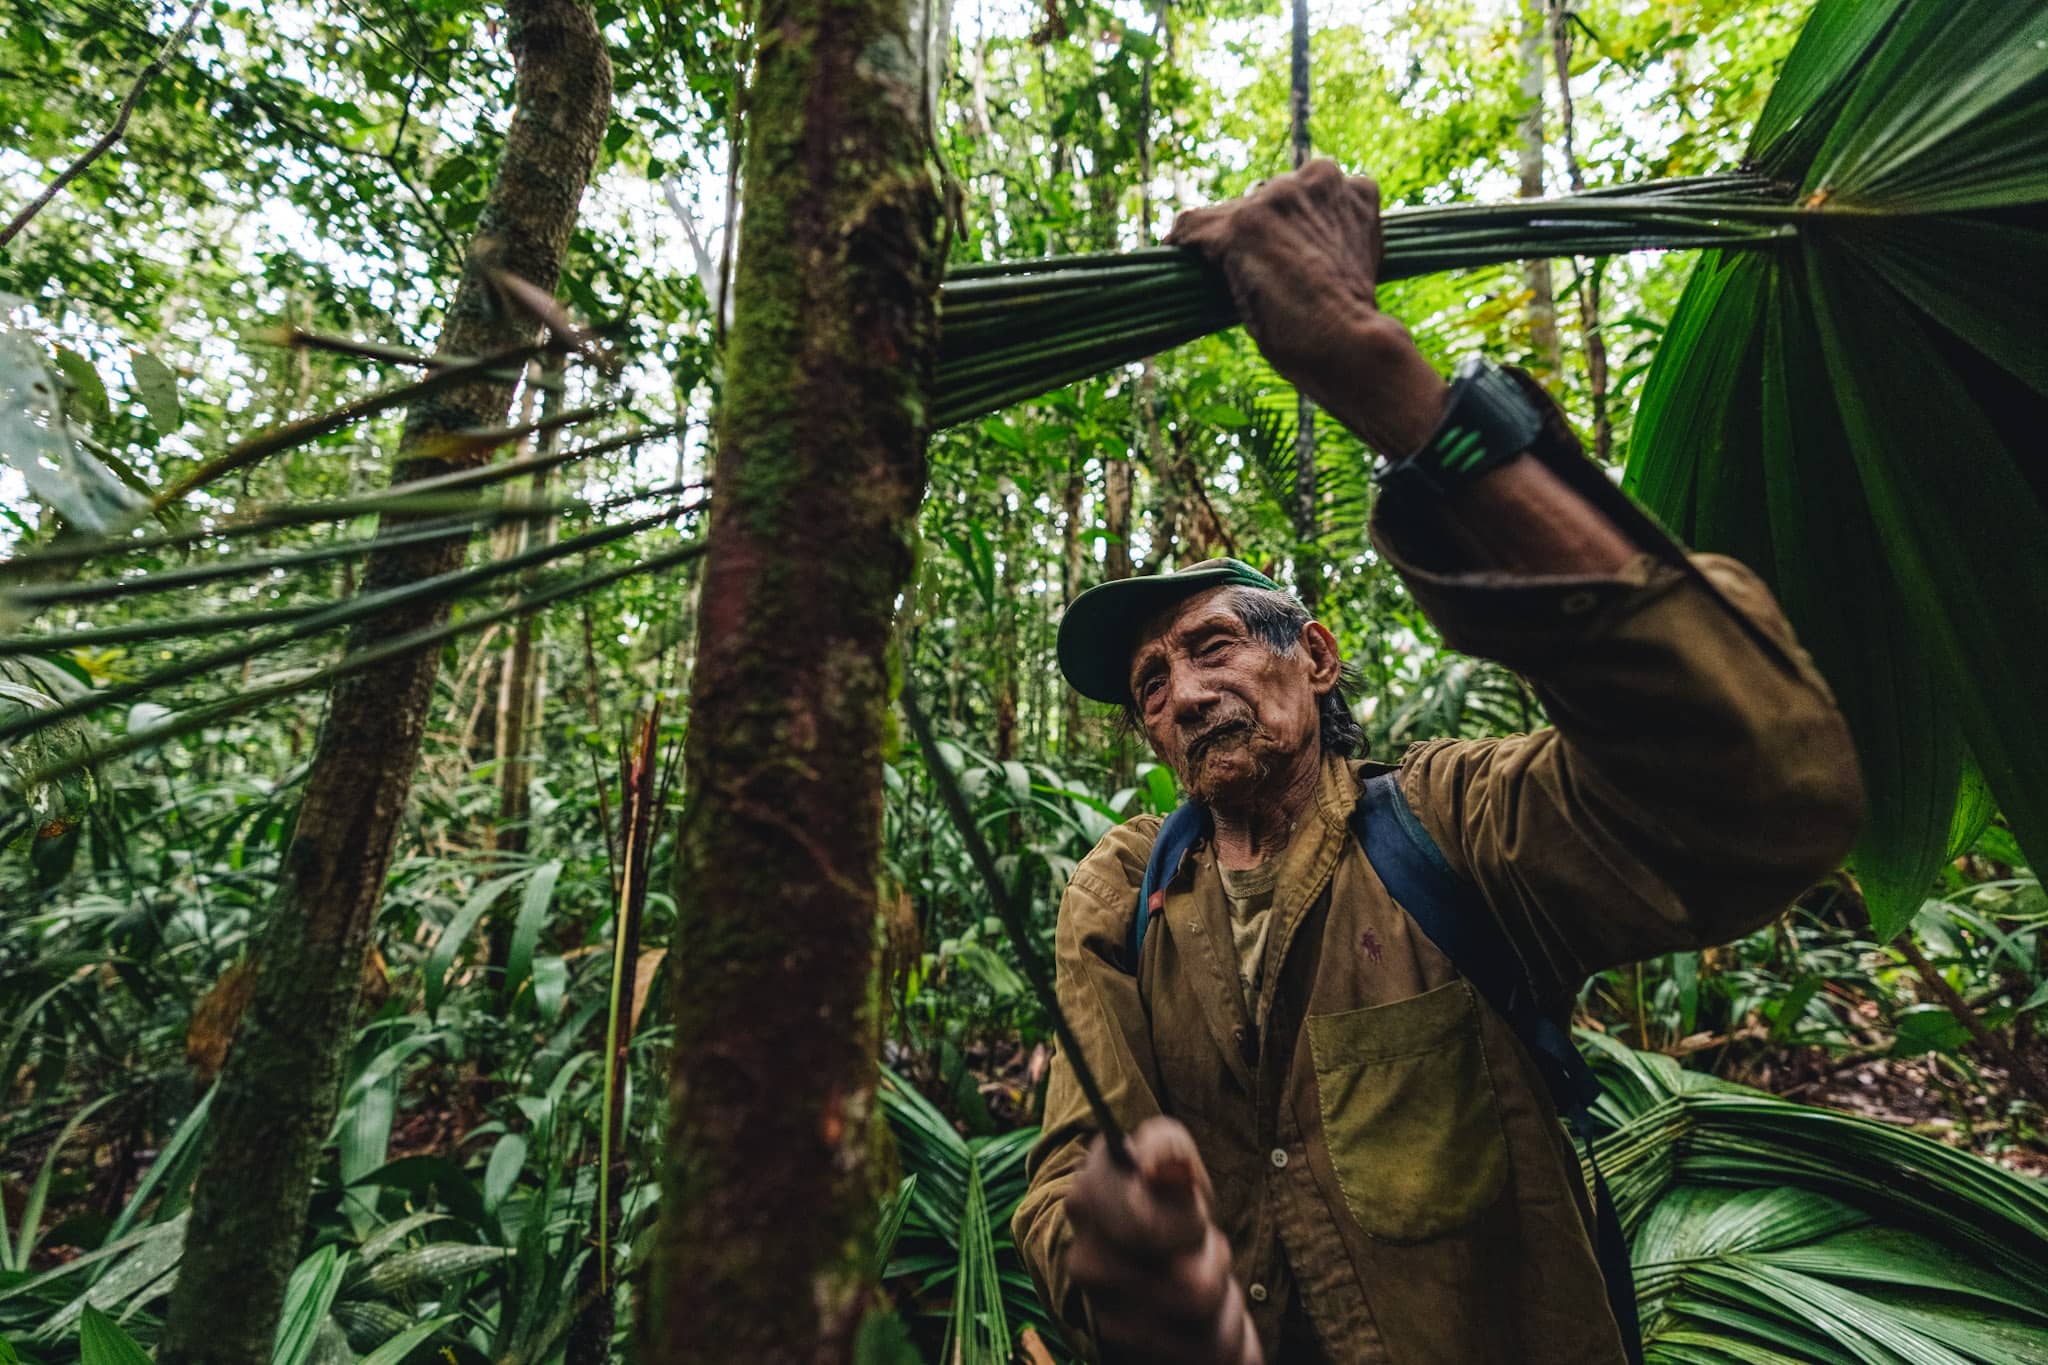 cacique fisi andoke with his machete in the colombian amazon